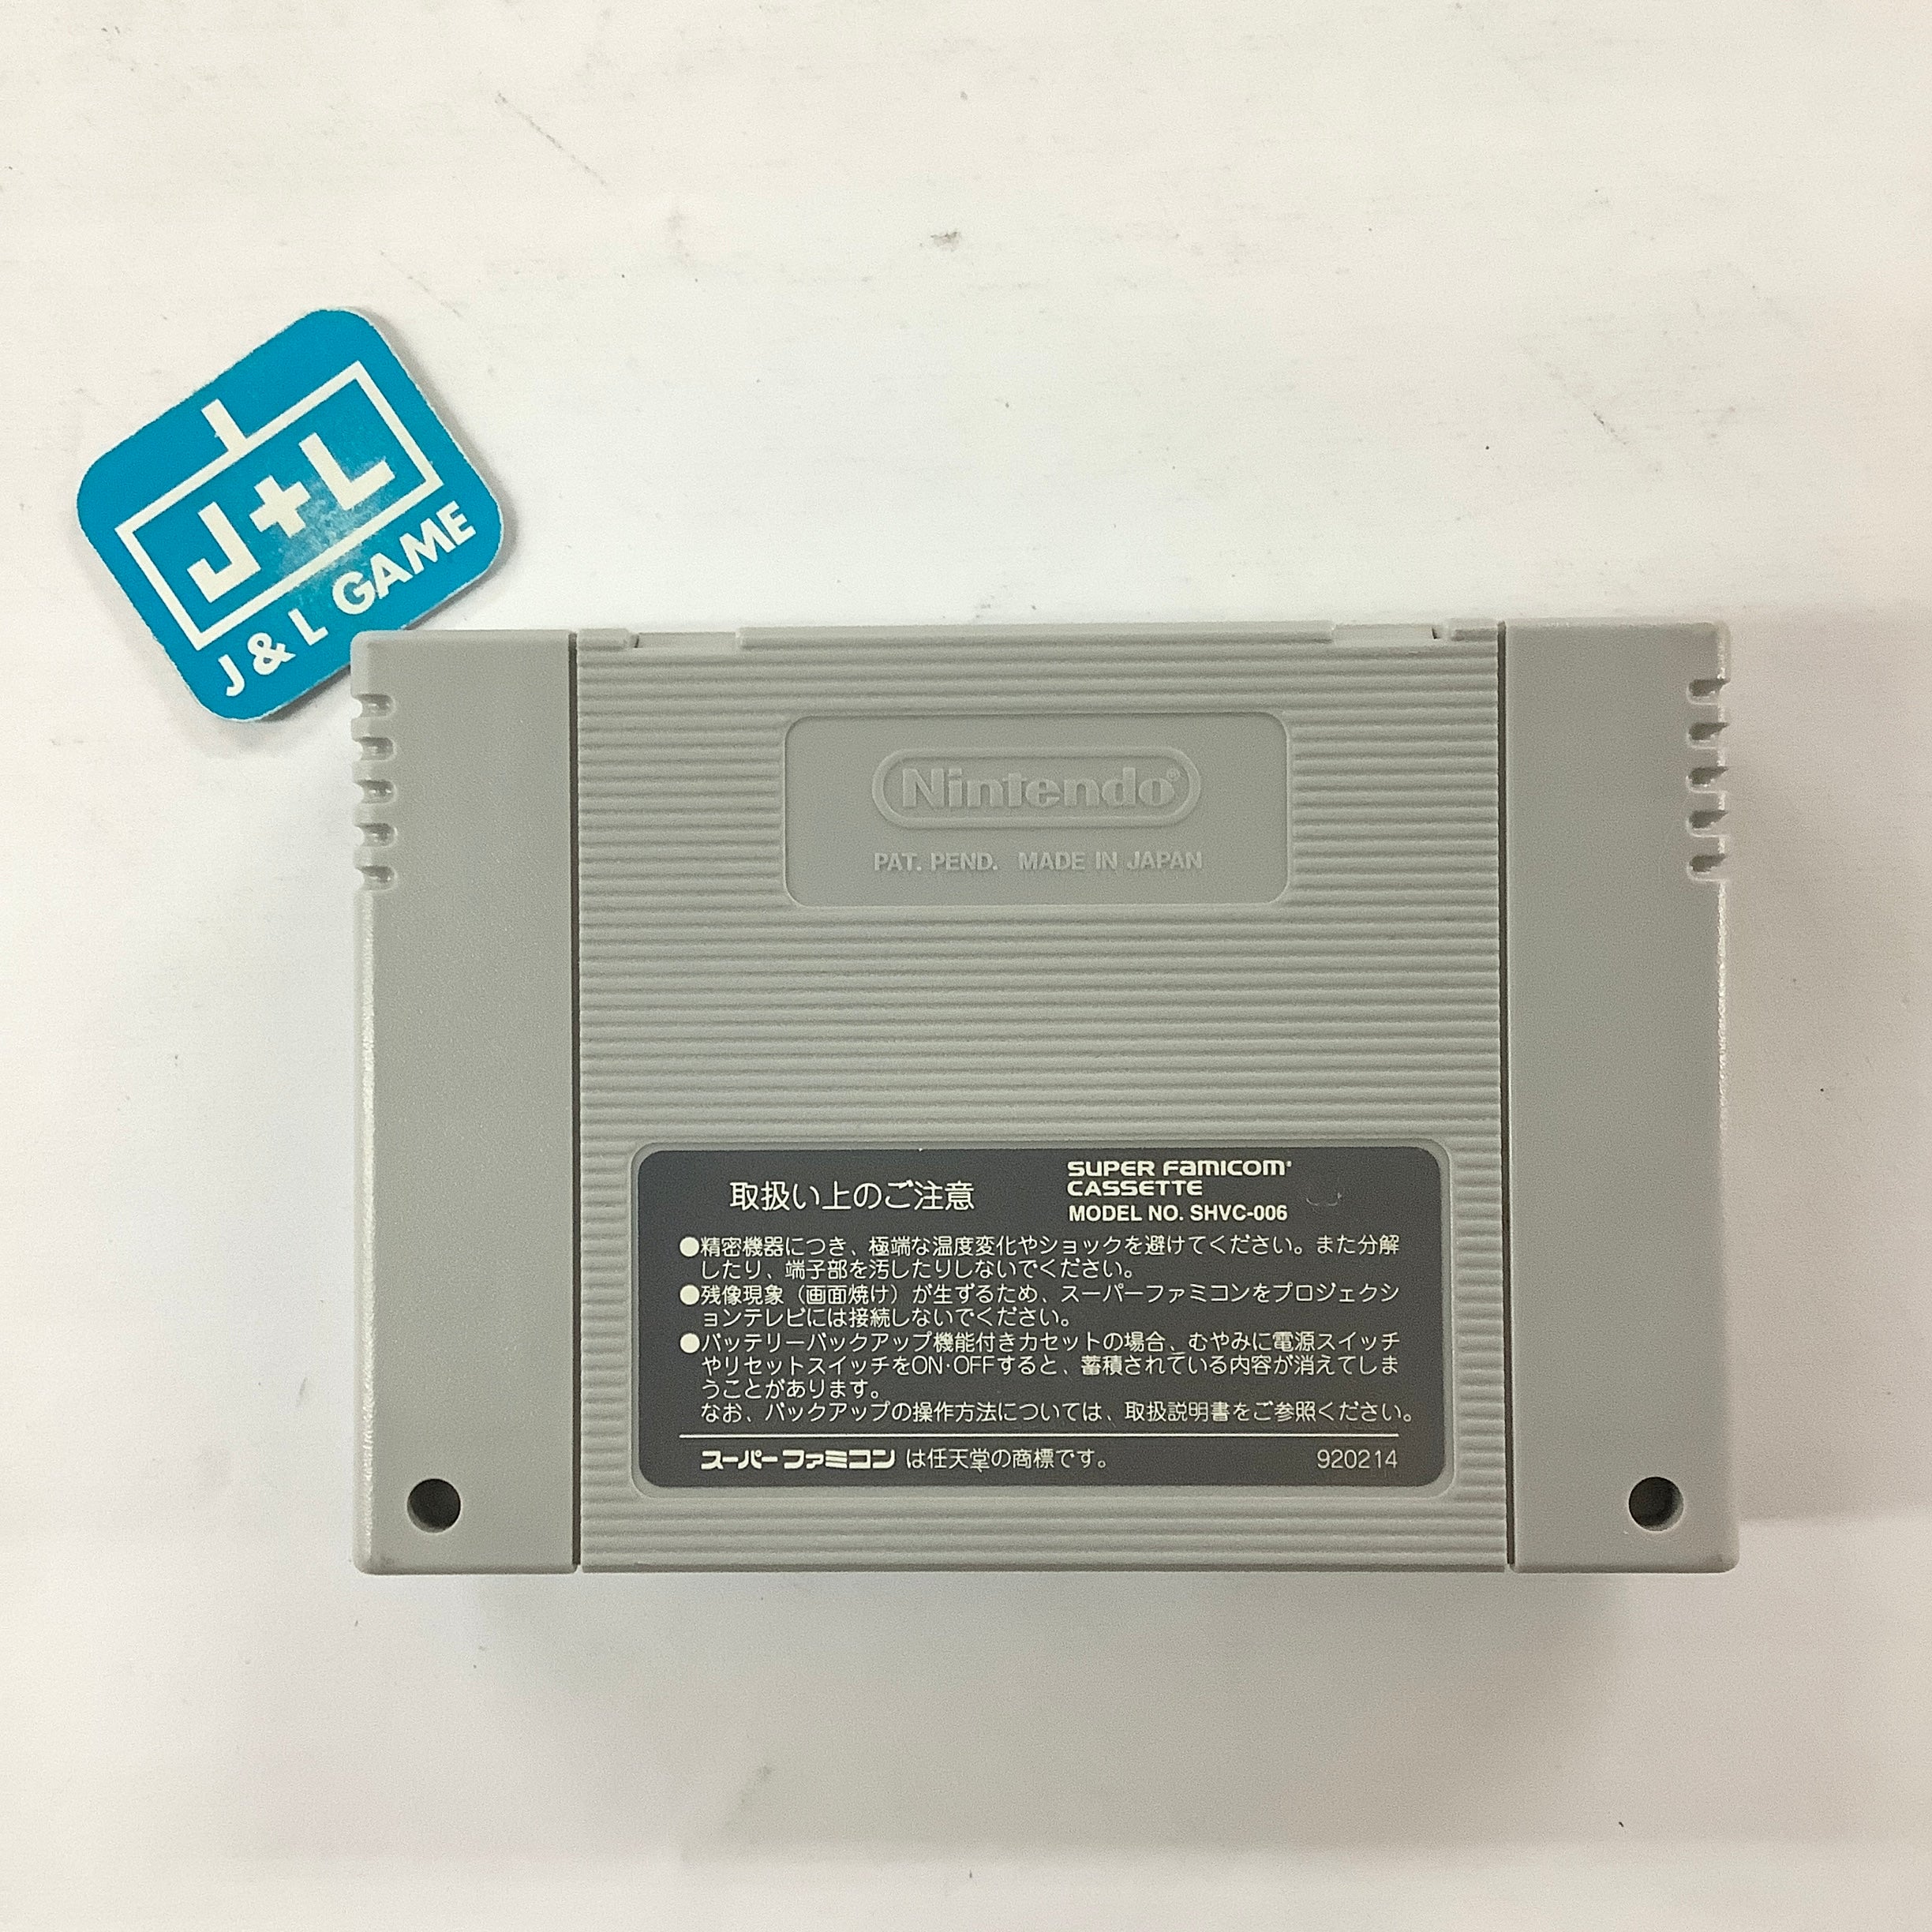 Derby Stallion III - (SFC) Super Famicom [Pre-Owned] (Japanese Import) Video Games ASCII Entertainment   